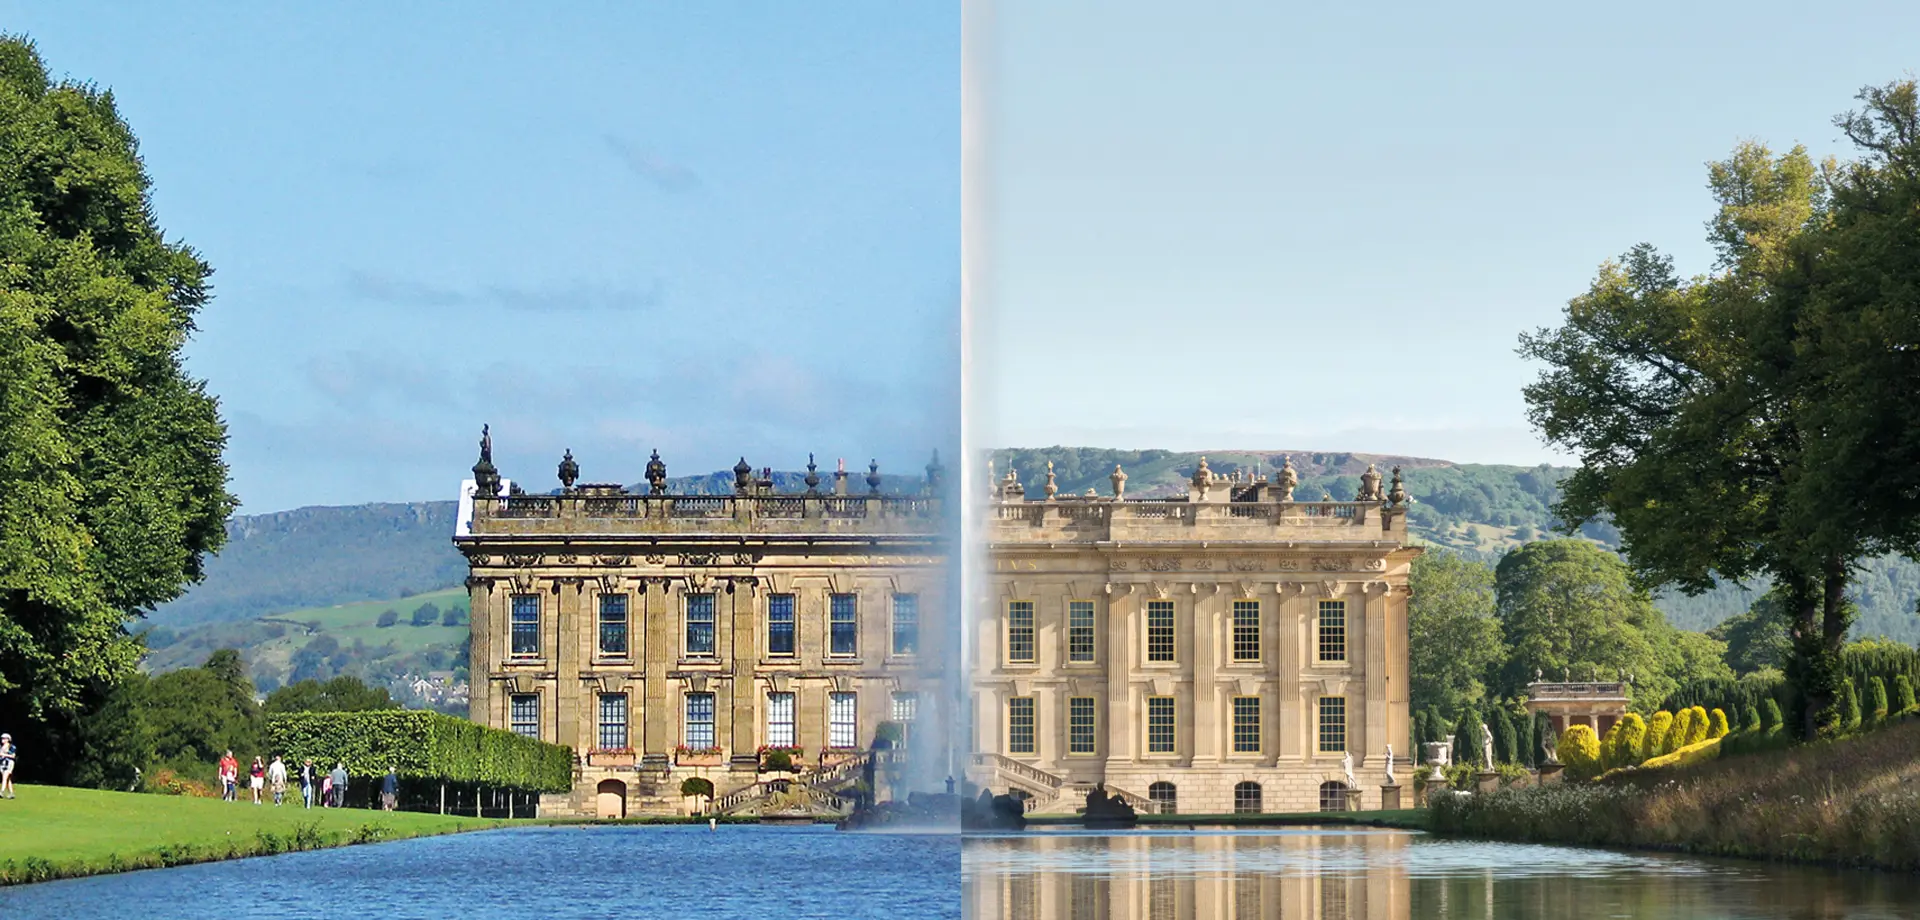 Chatsworth sparkles following biggest restoration for 200 years